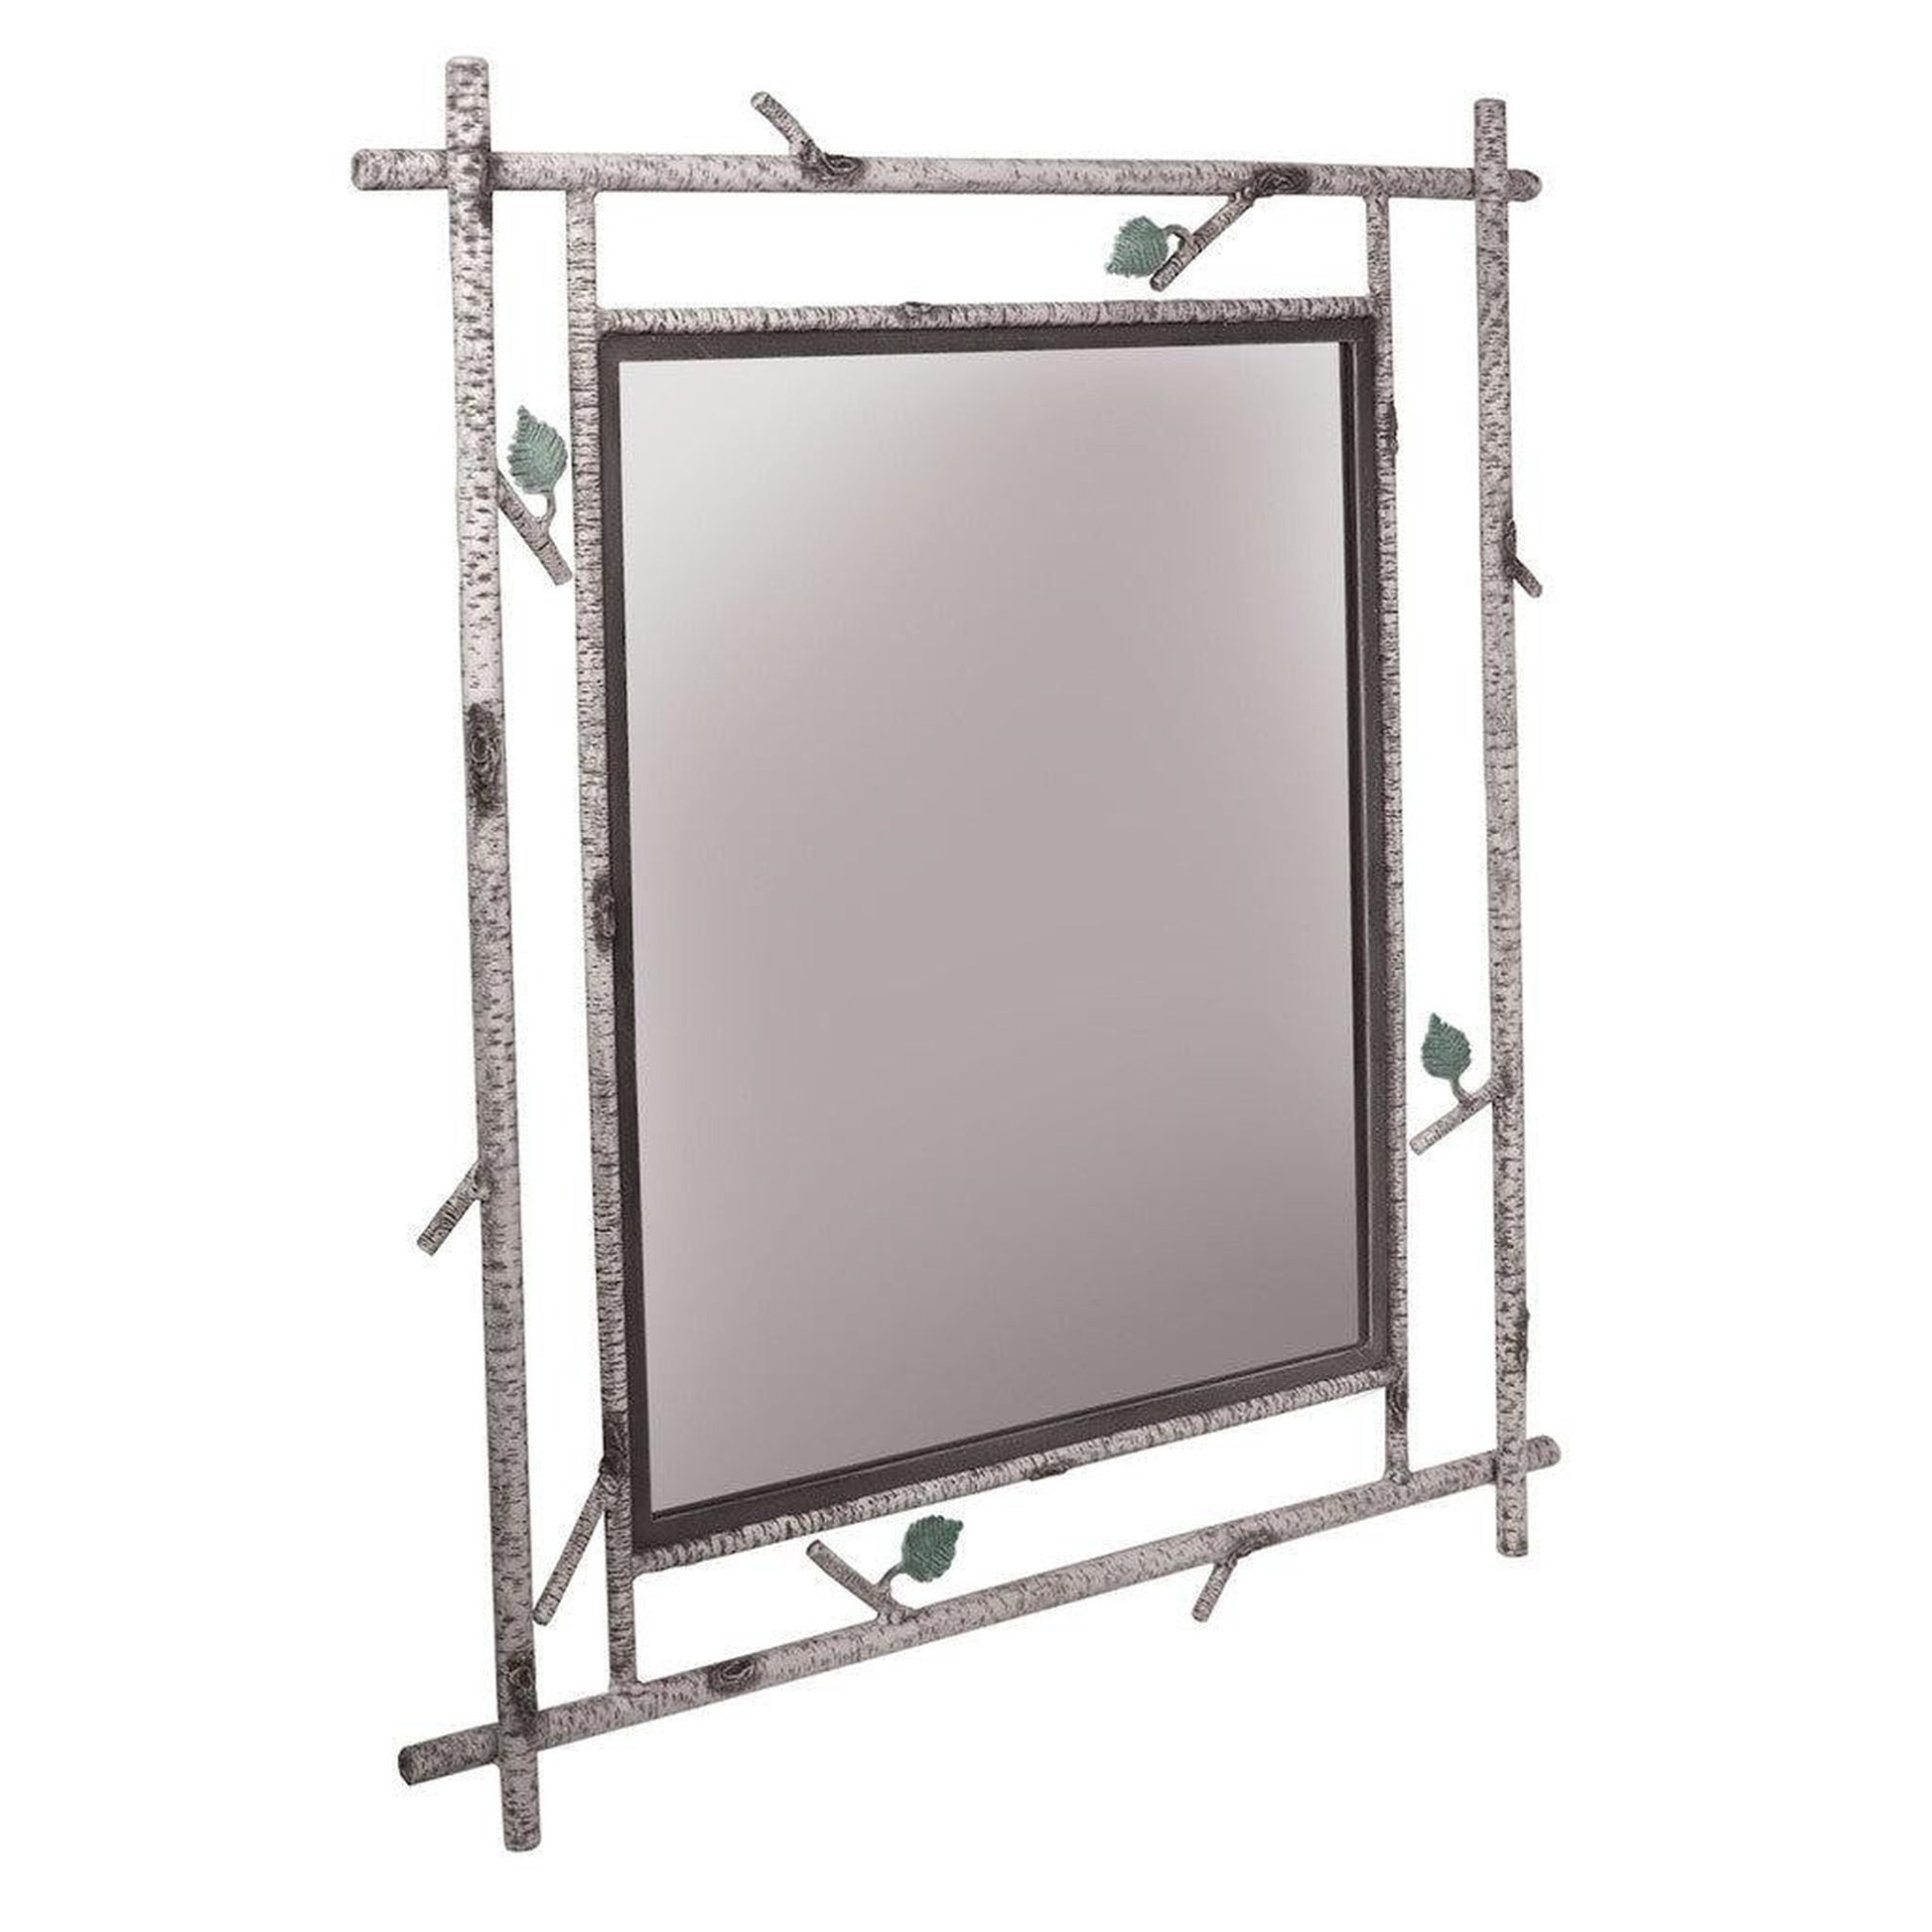 Stone County Ironworks Whisper Creek 35" x 47" Large Woodland Brown Iron Wall Mirror With Copper Iron Accent